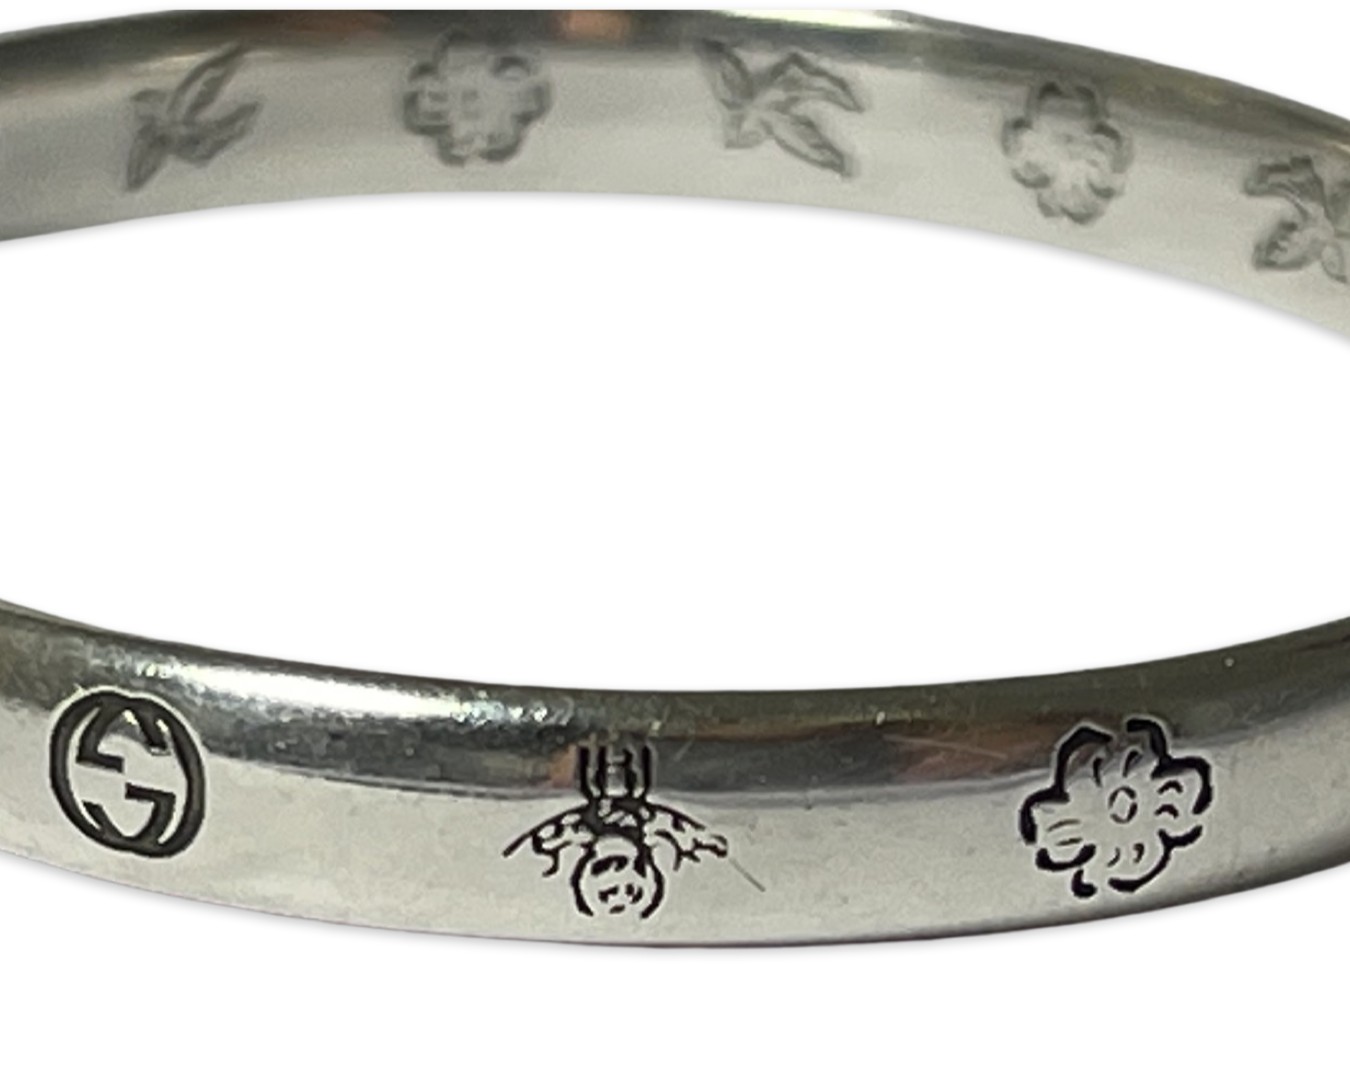 Gucci Silver 'Love Is Blind' Bangle weighing 13.4 grams - Image 3 of 5